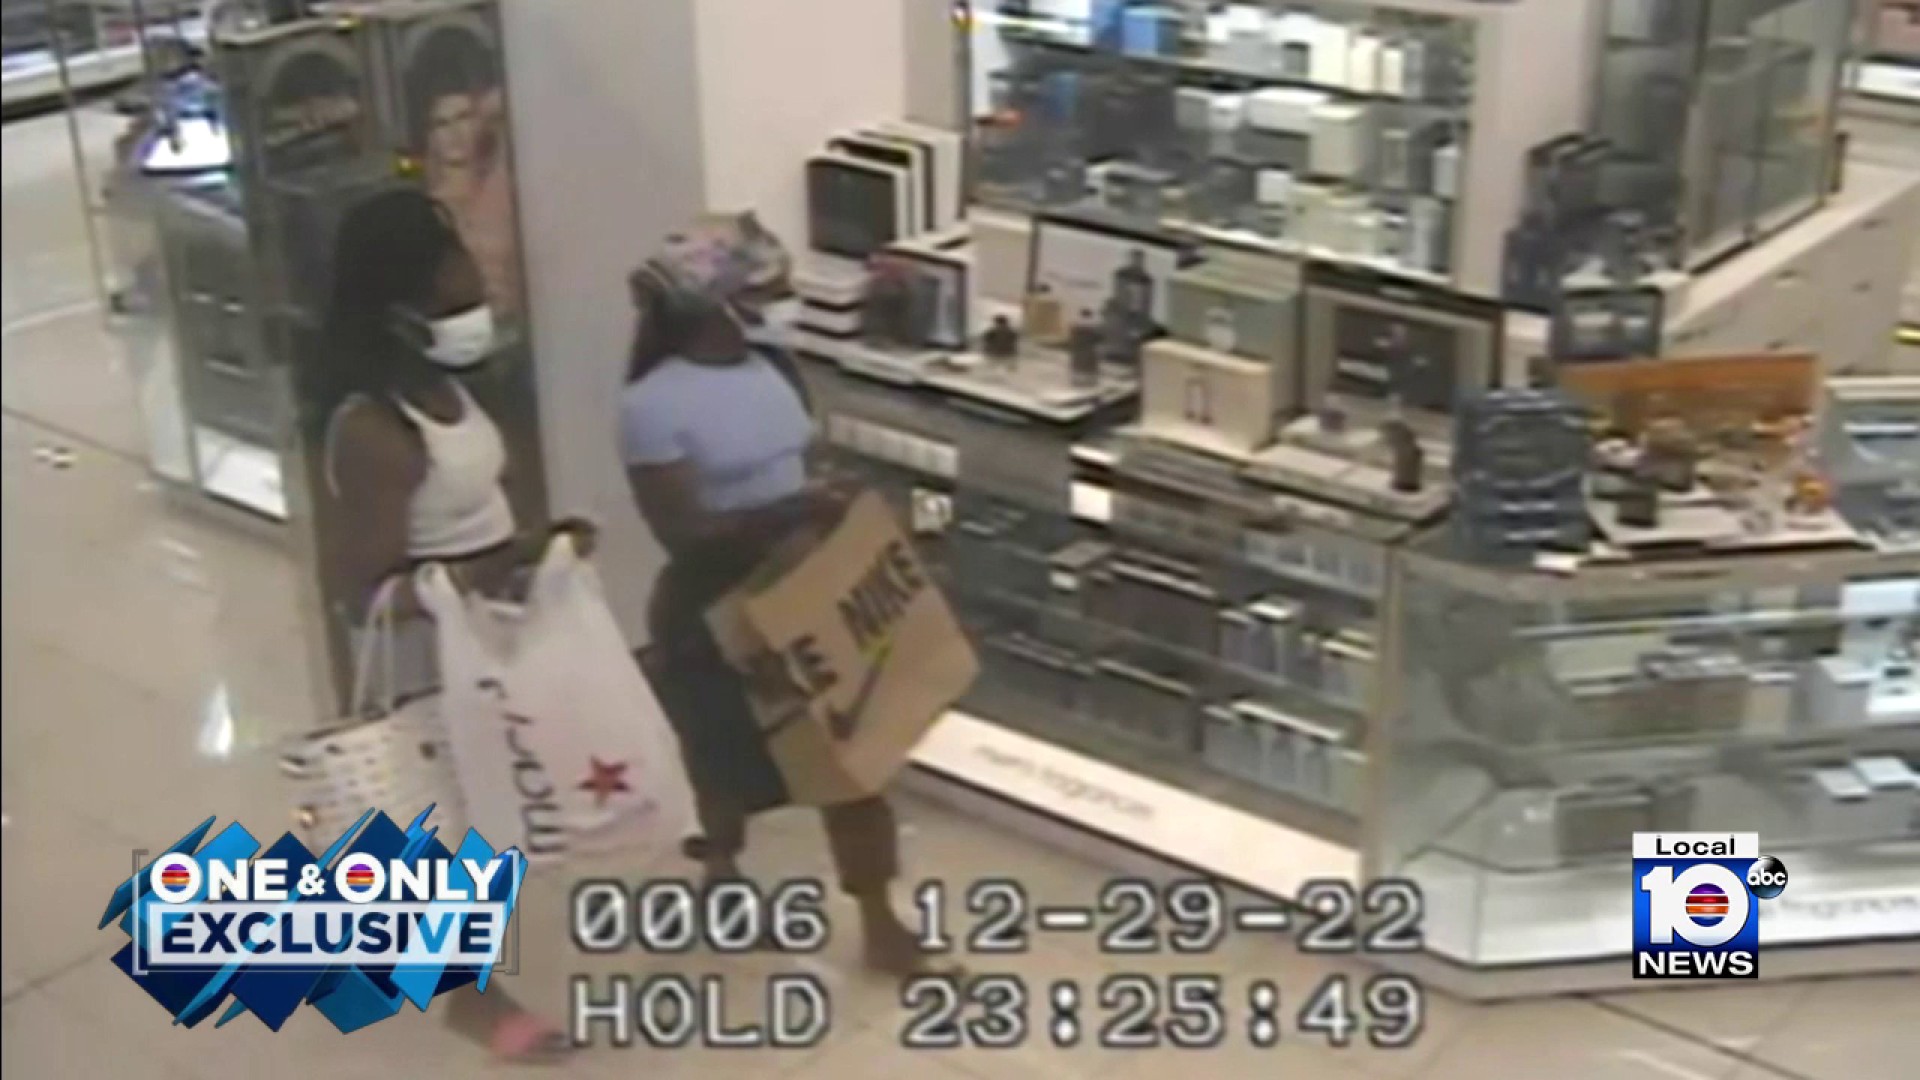 ONLY in DADE on X: Dadeland Mall security catches woman stealing